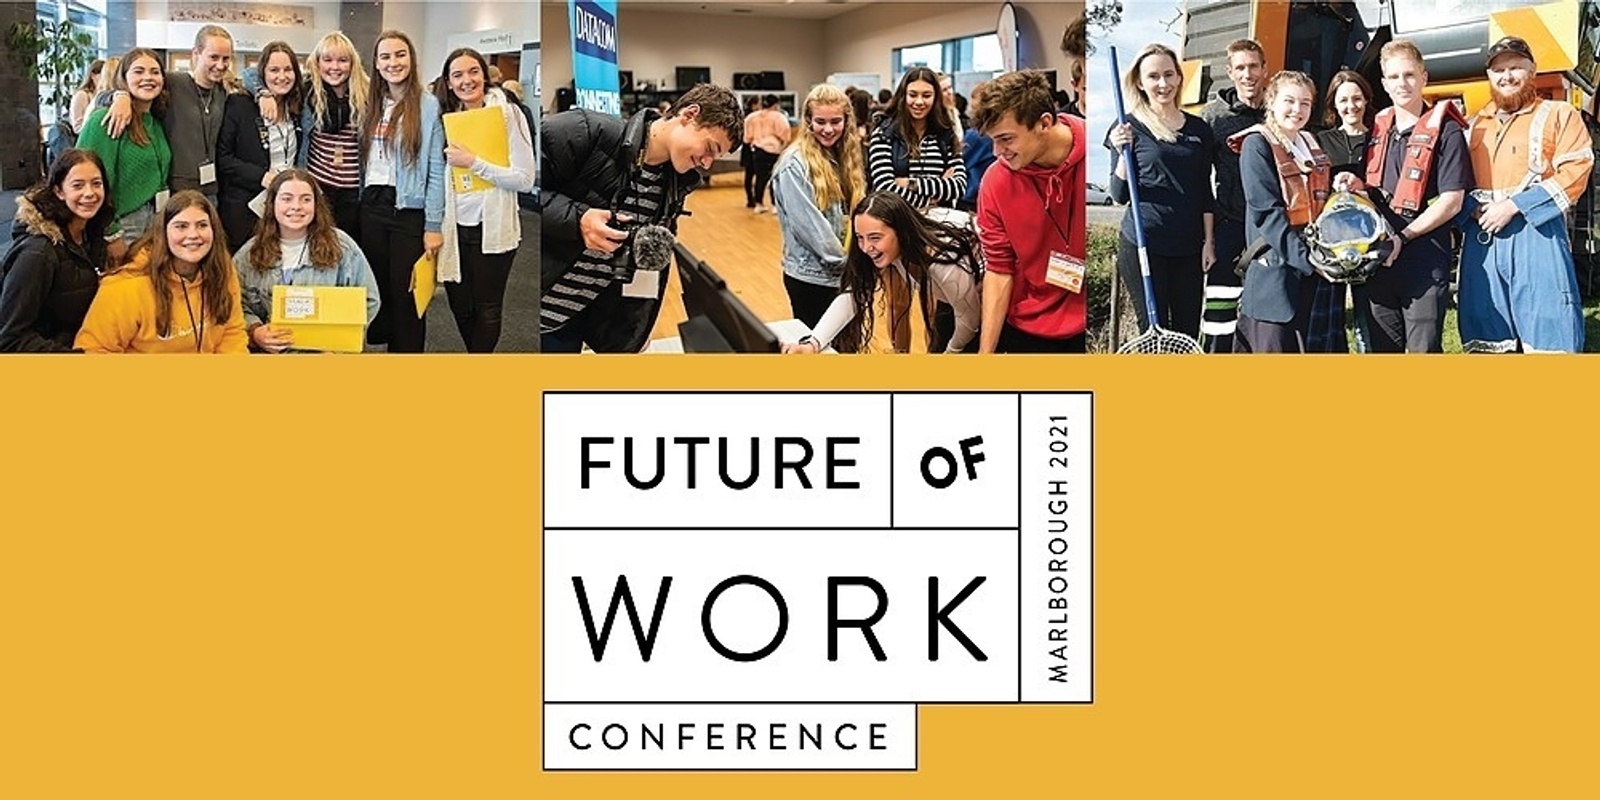 Future of Work Conference 2021 Humanitix